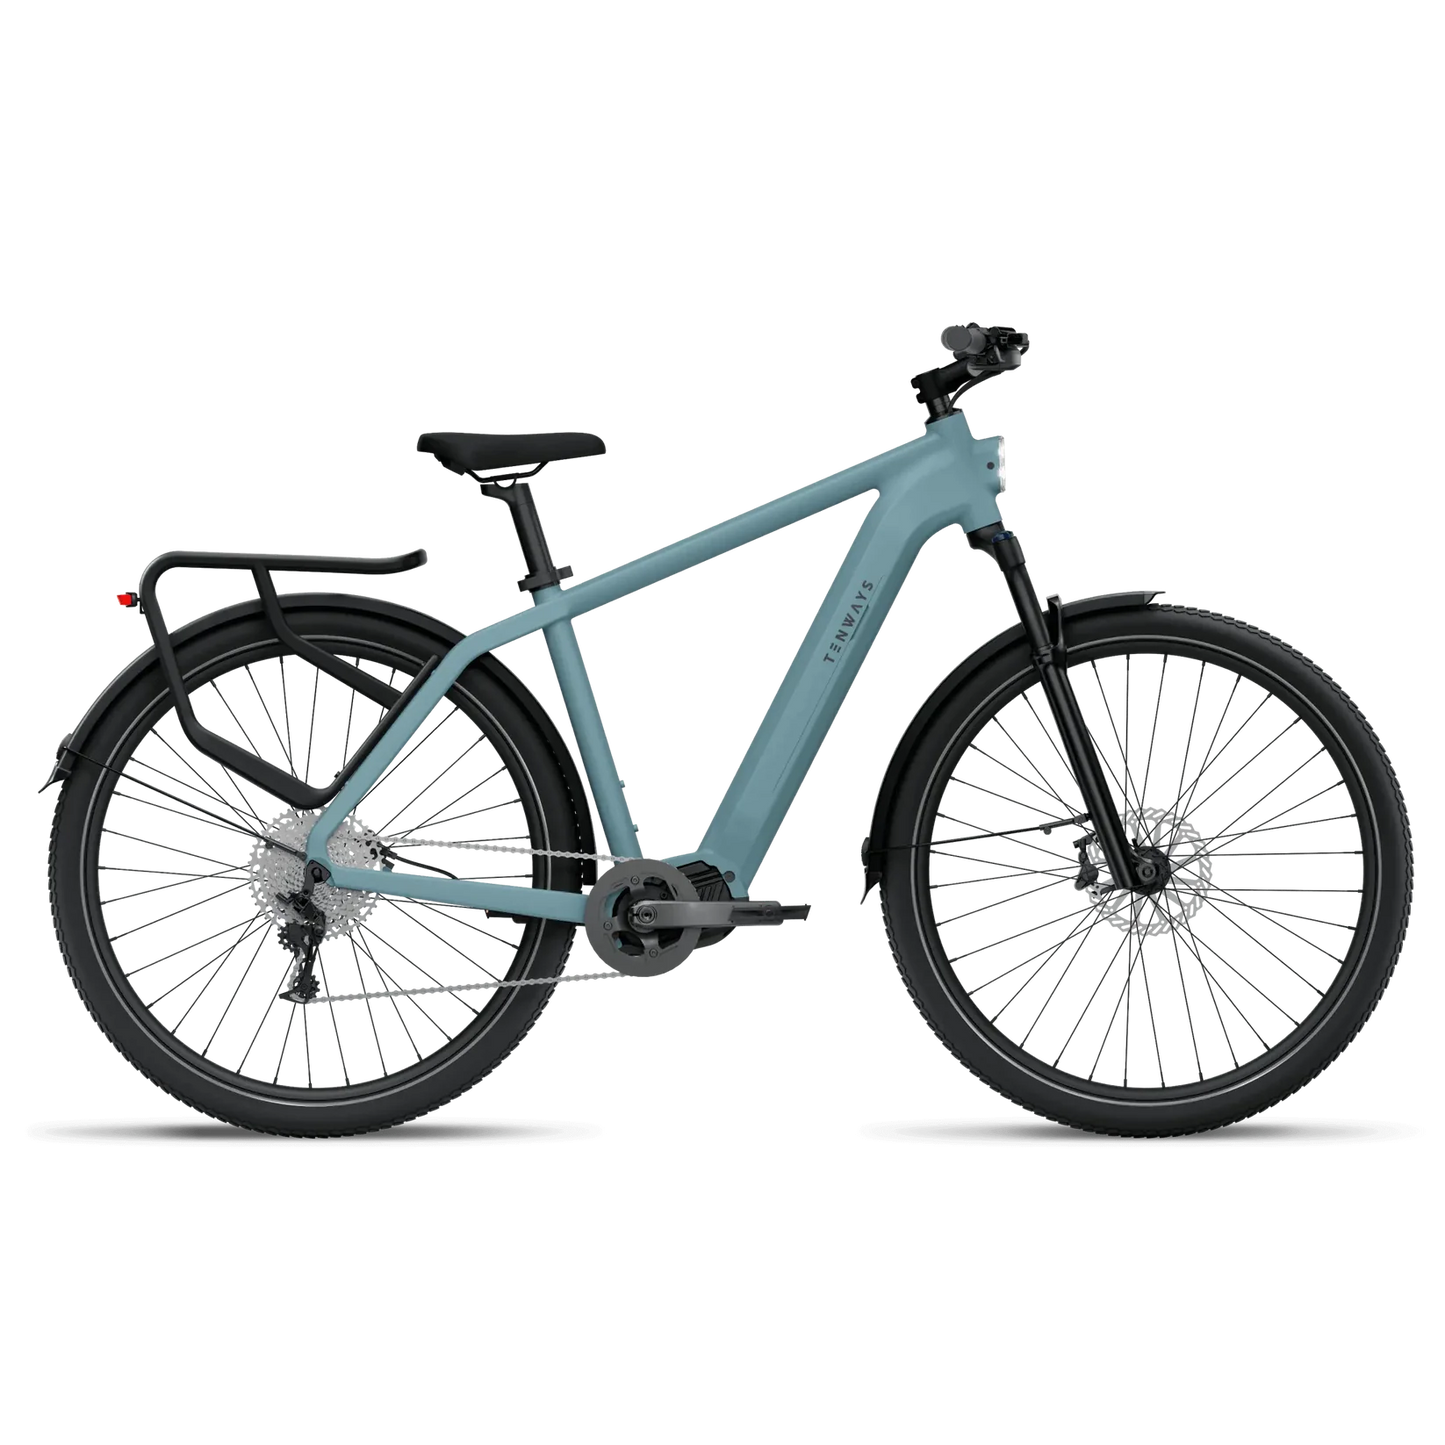 A Tenways AGO X commuter e-bike with a rear luggage rack, equipped with disc brakes and a minimalistic frame design, isolated on a black background.